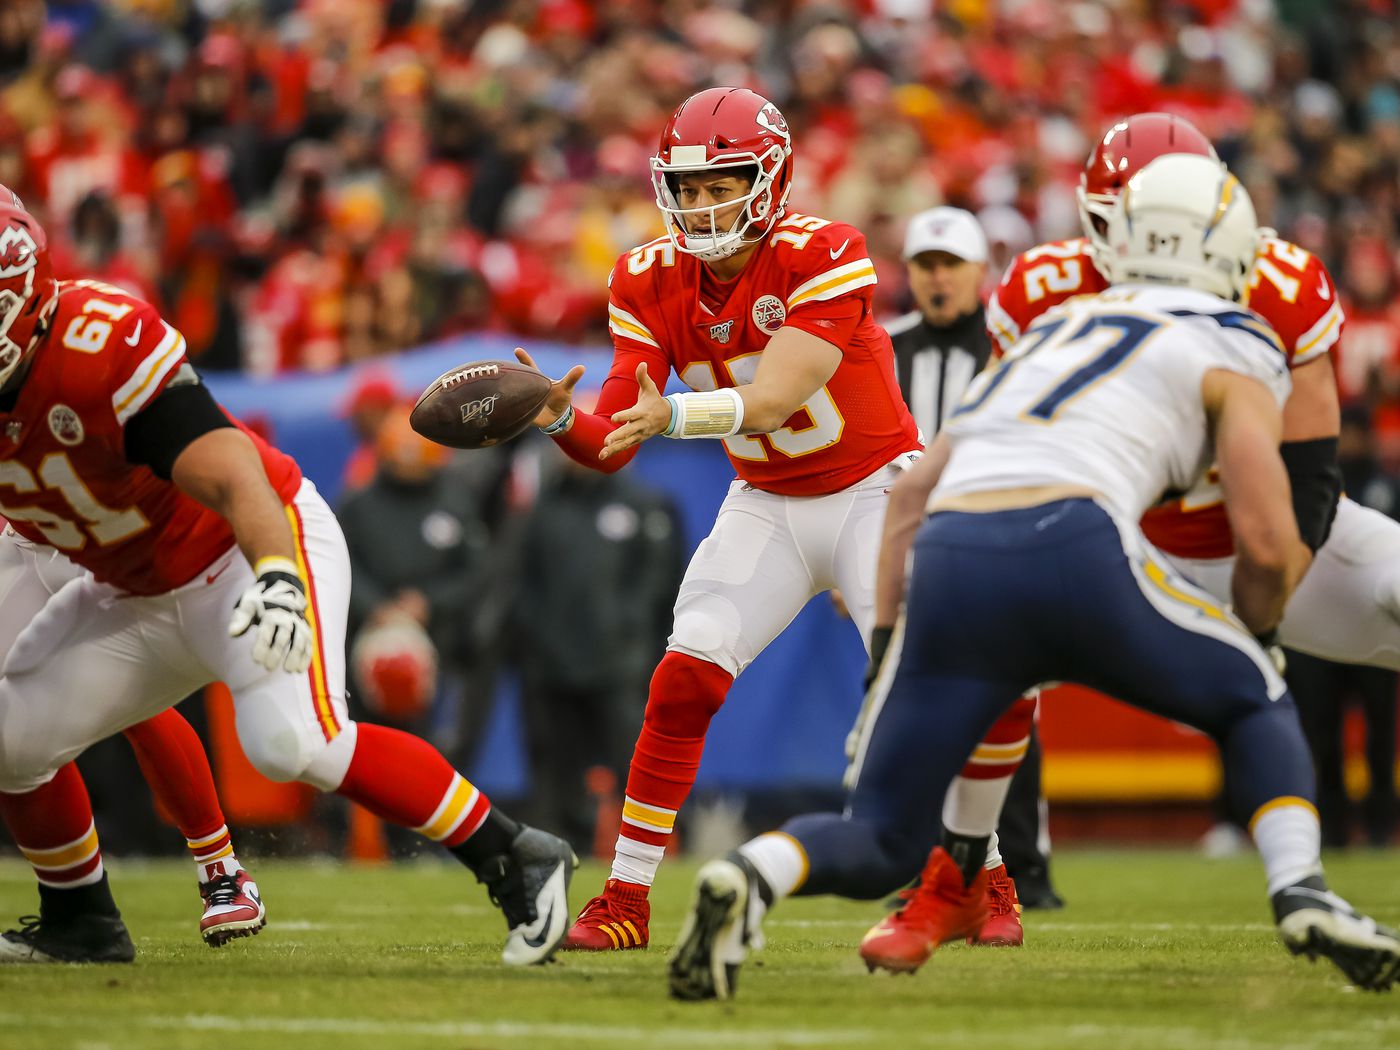 chiefs against the chargers